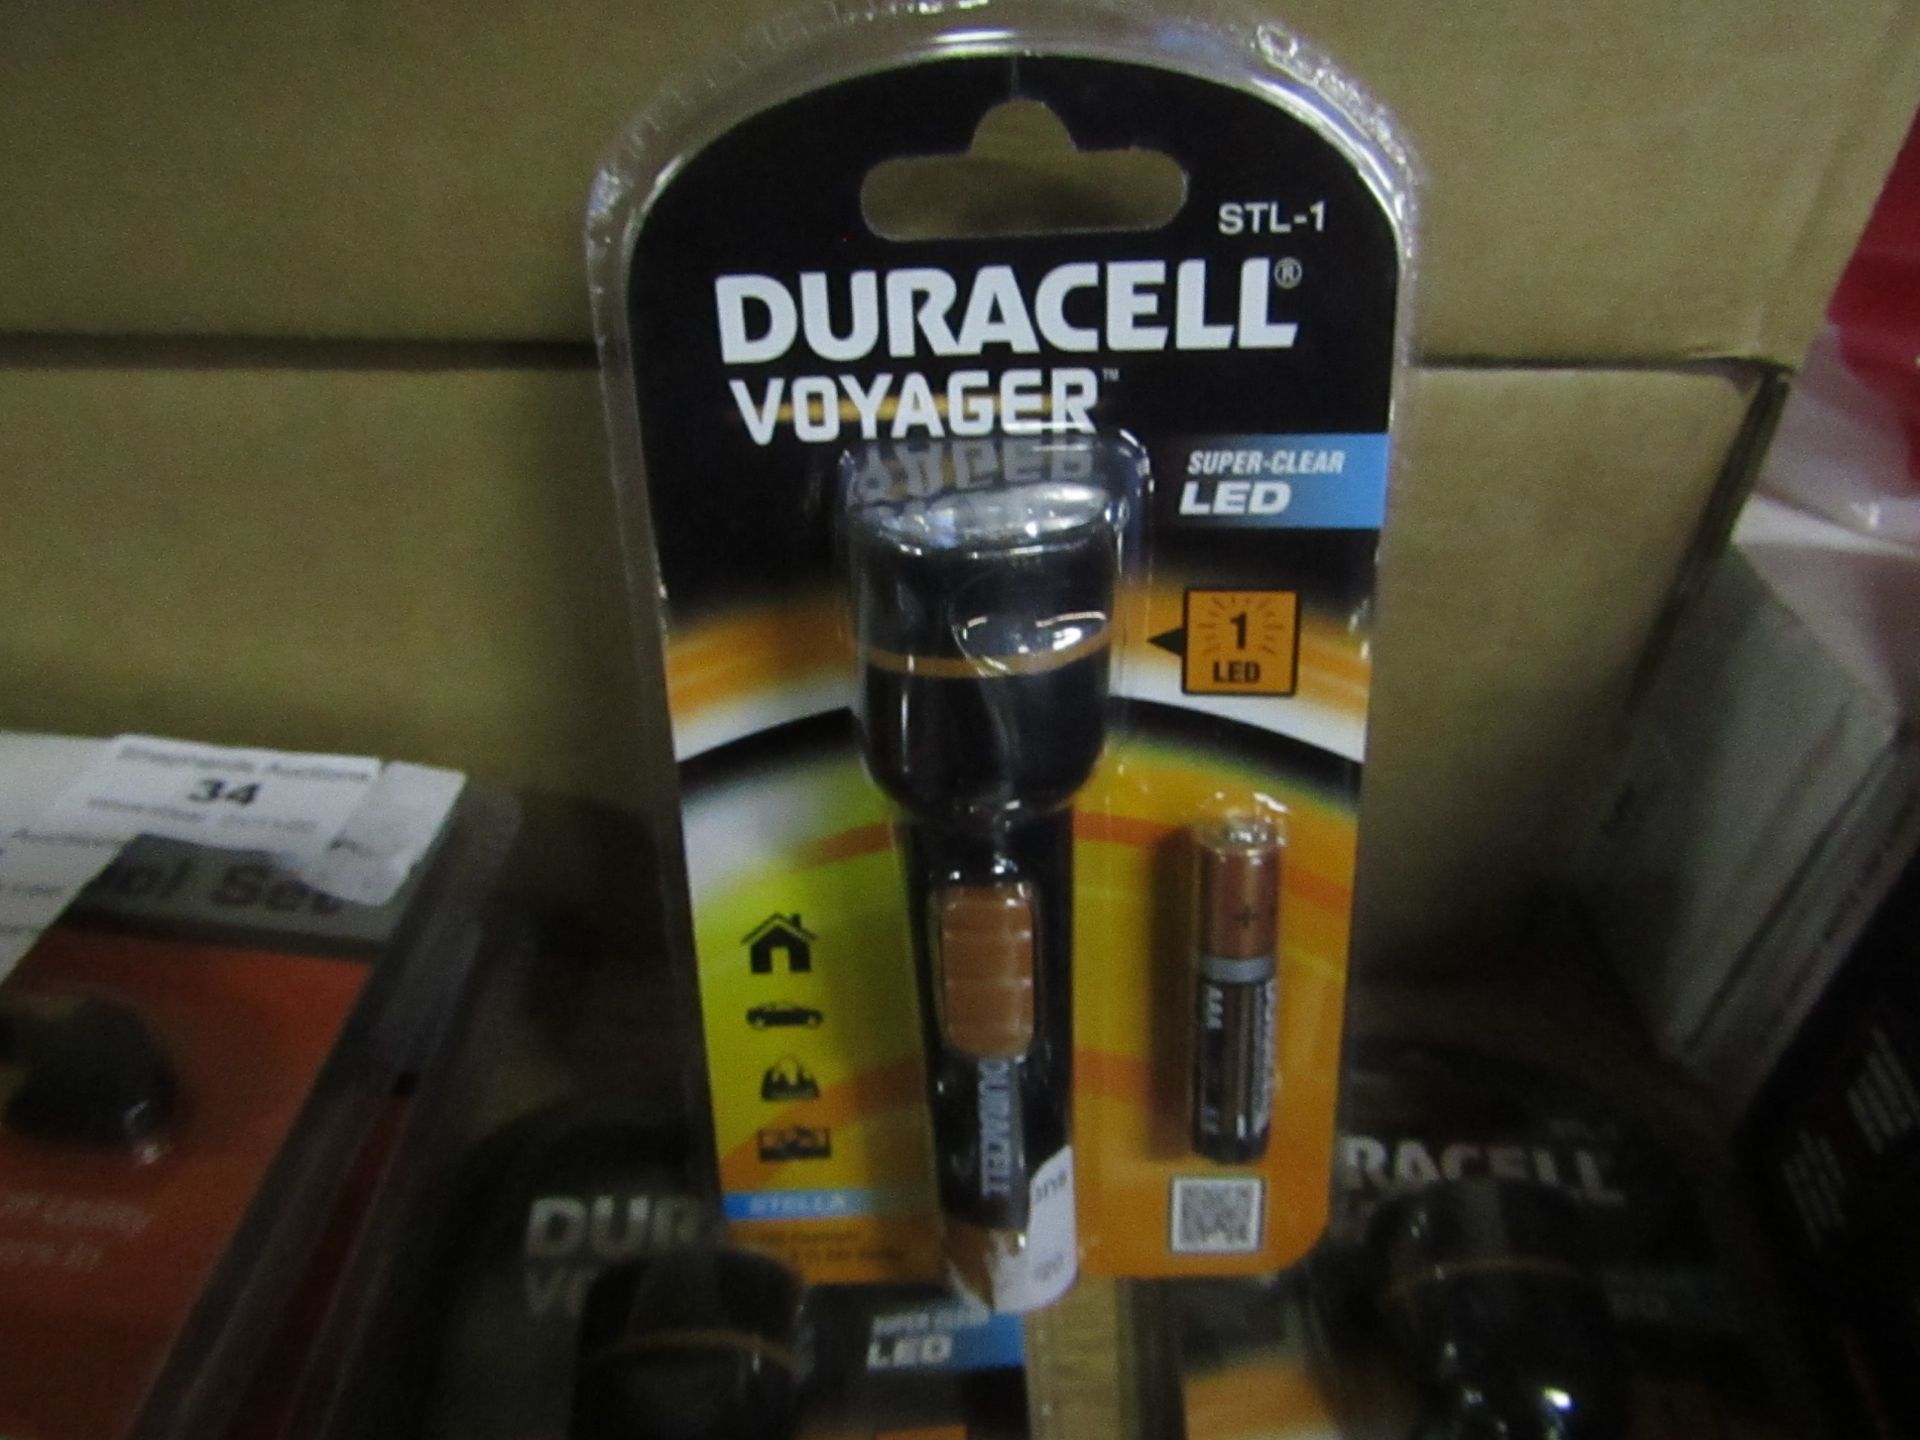 Duracell - Voyager (Super Clear LED) - New & Packaged.